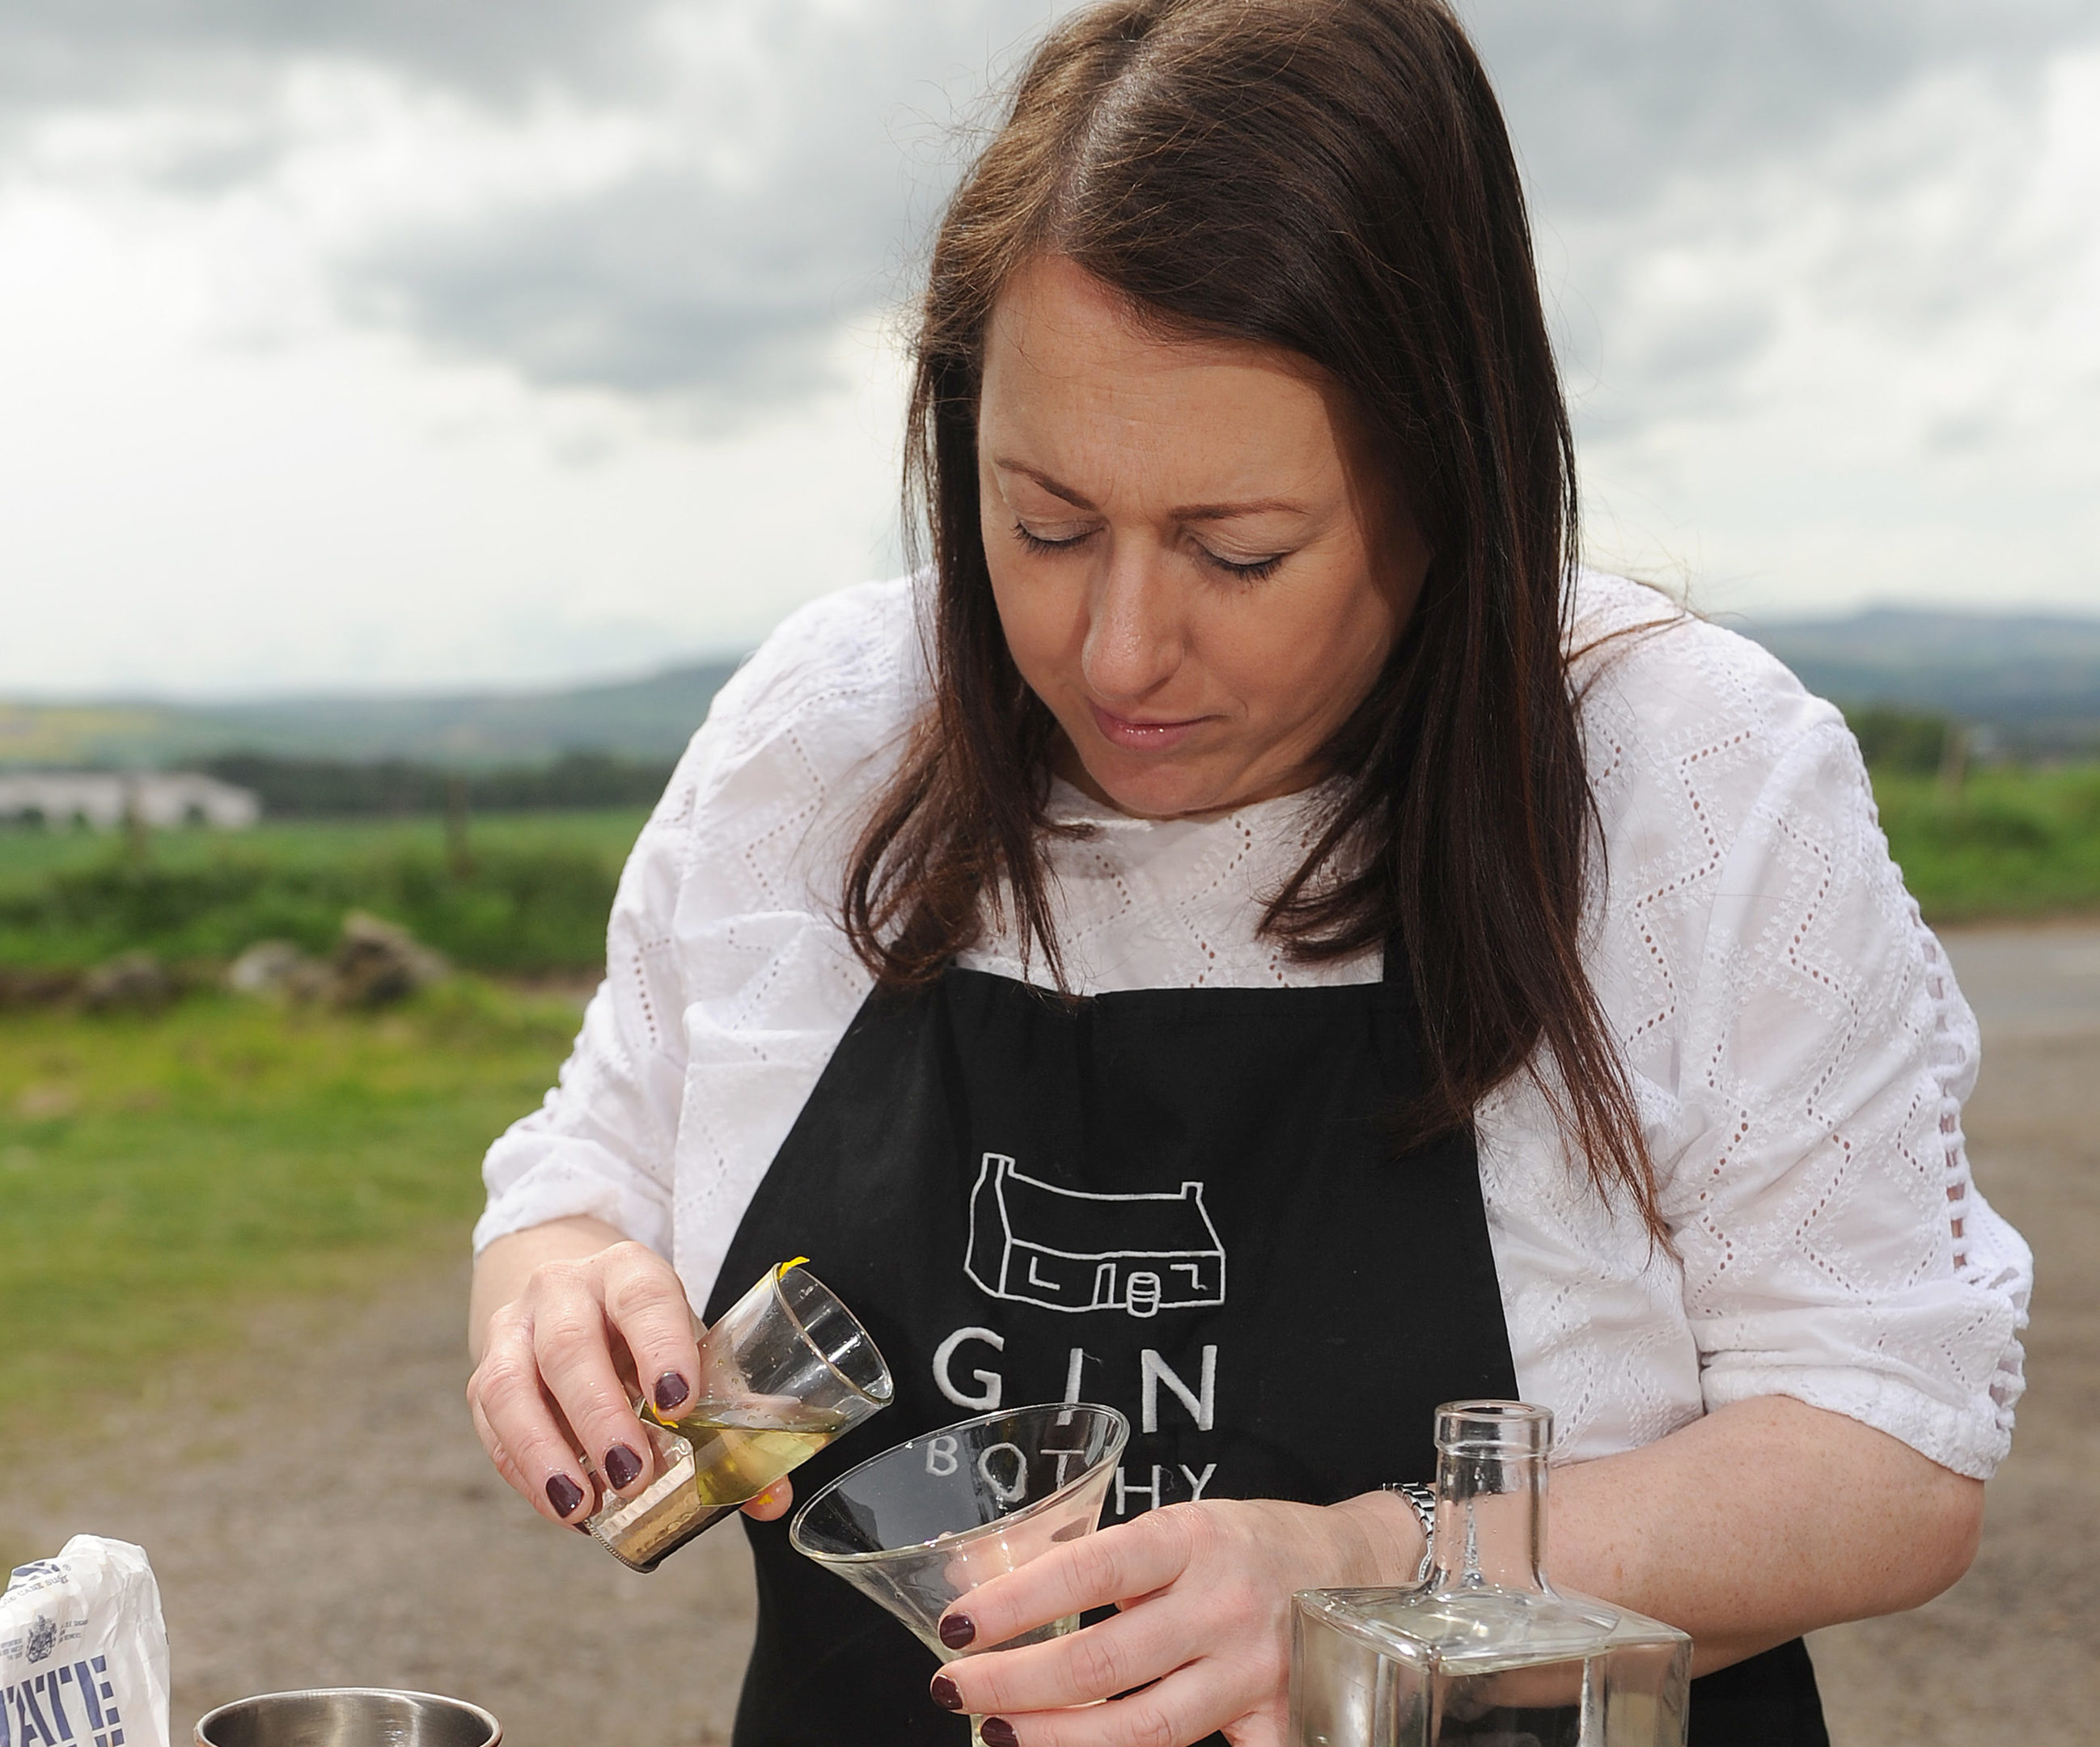 Kim Dickson of the Gin Bothy whose business was the setting for Monday's launch.